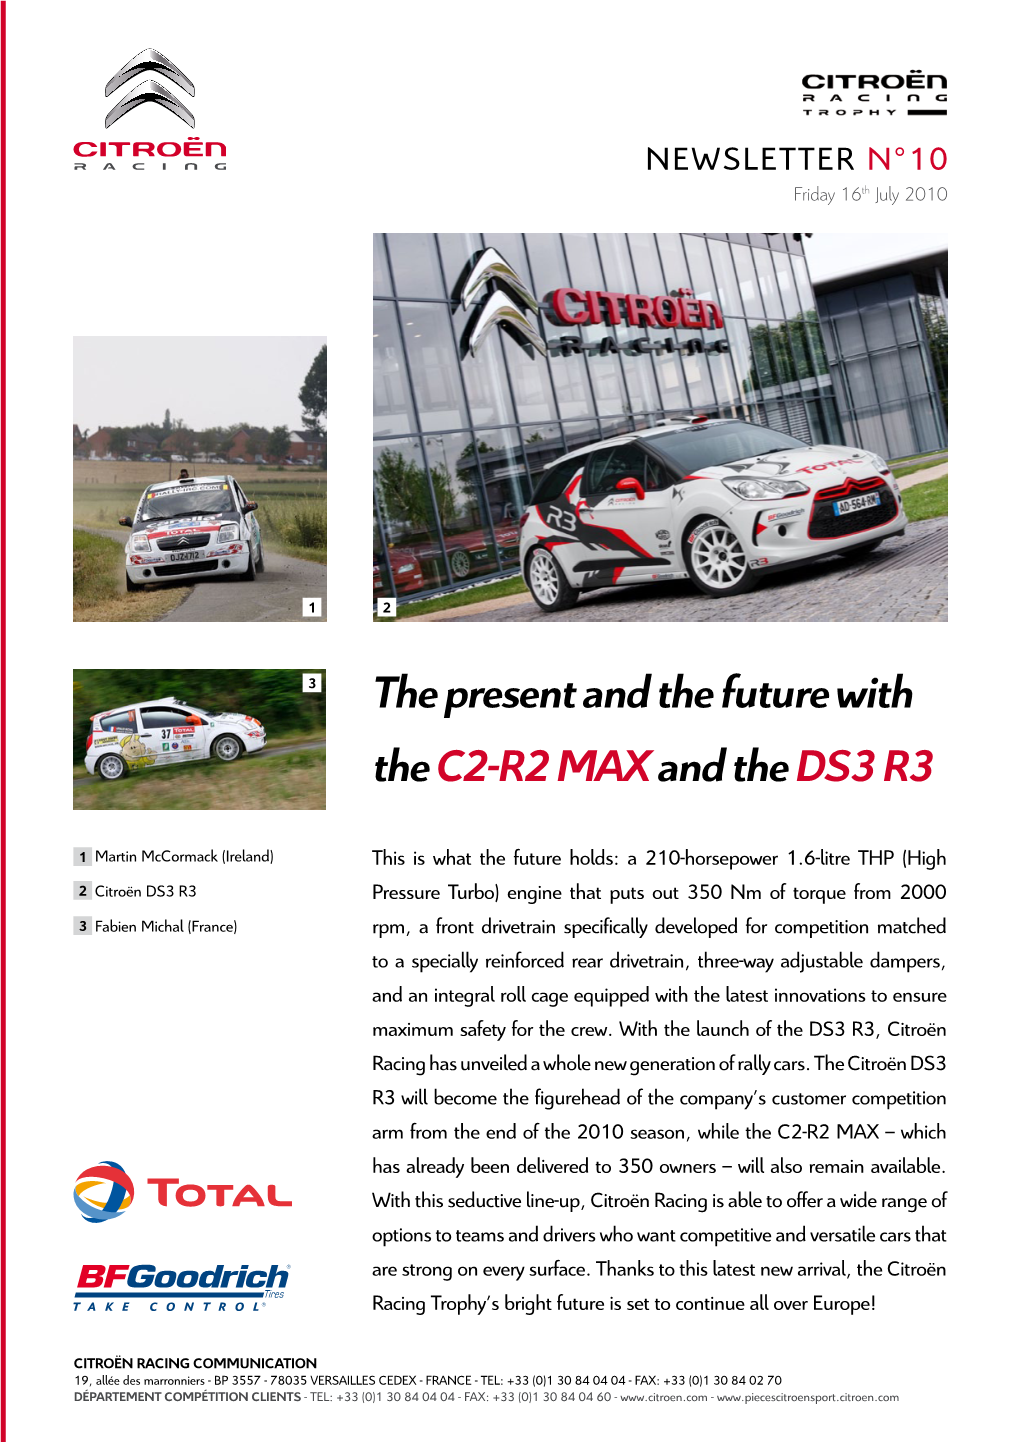 The Present and the Future with the C2-R2 Maxand the DS3 R3